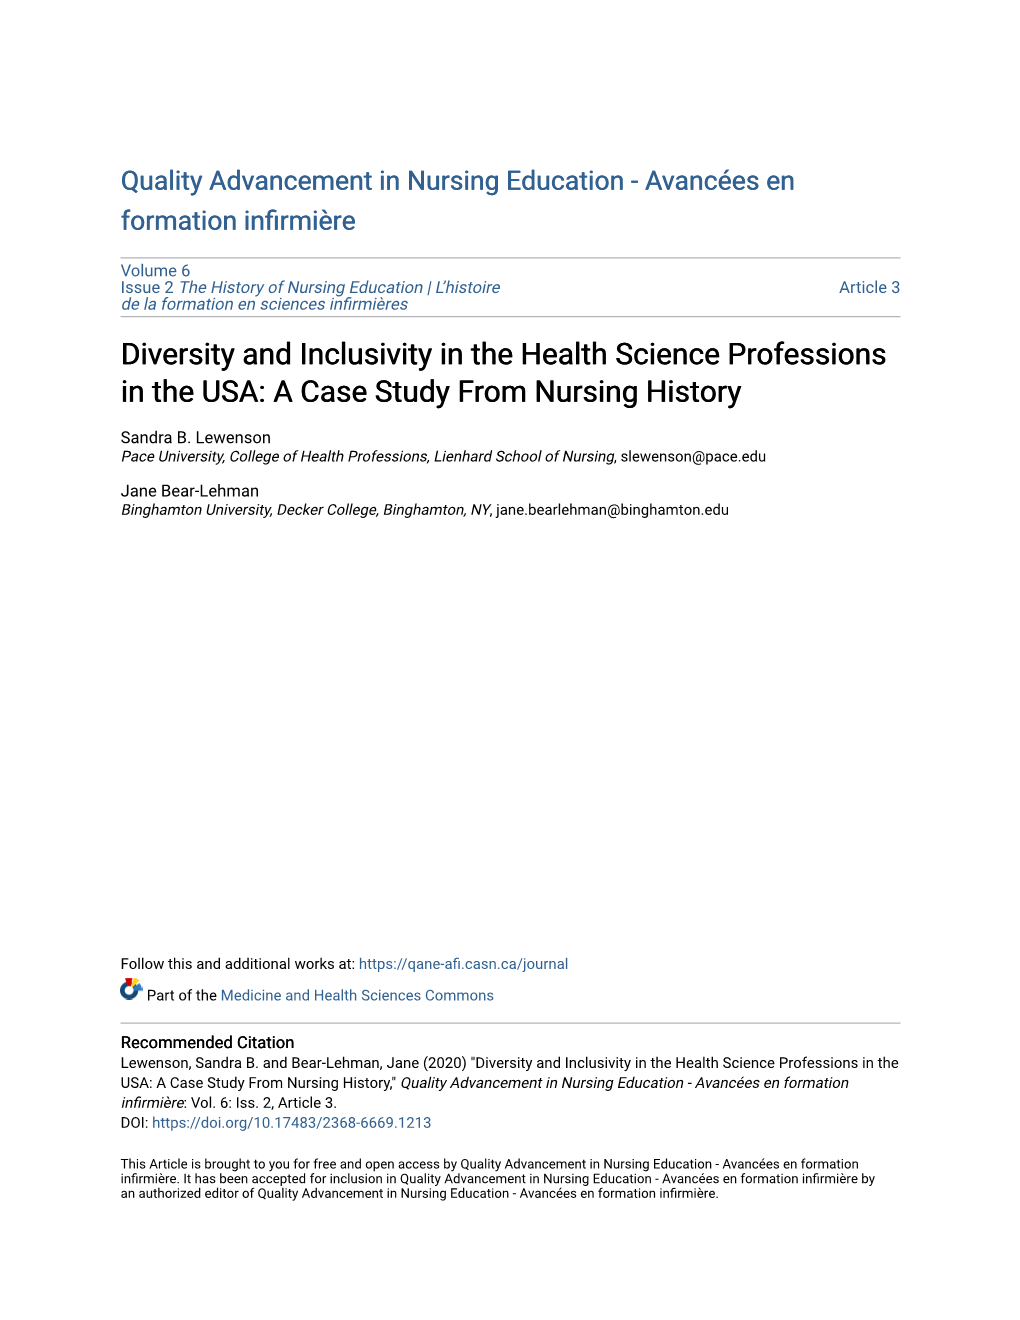 Diversity and Inclusivity in the Health Science Professions in the USA: a Case Study from Nursing History